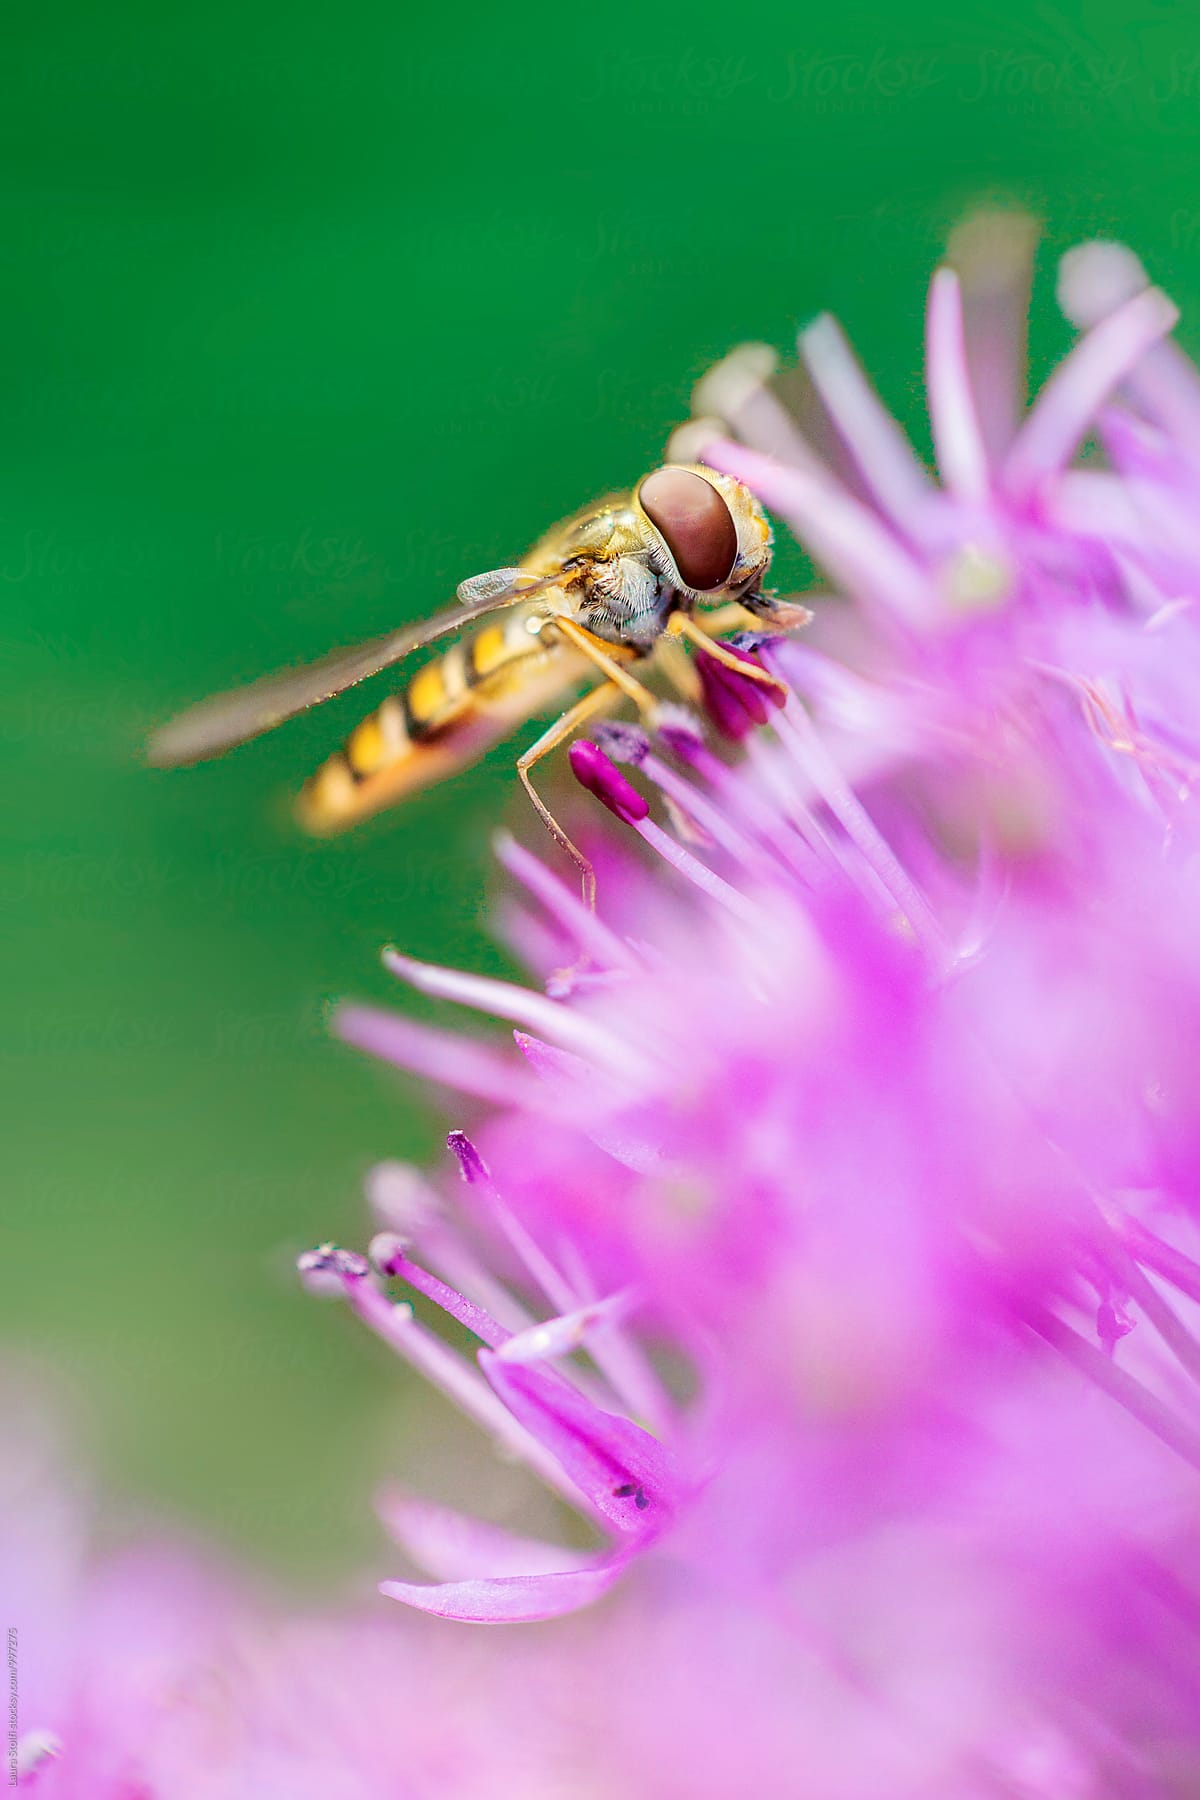 Extreme close-up of hoverfly pollinating purple flowers